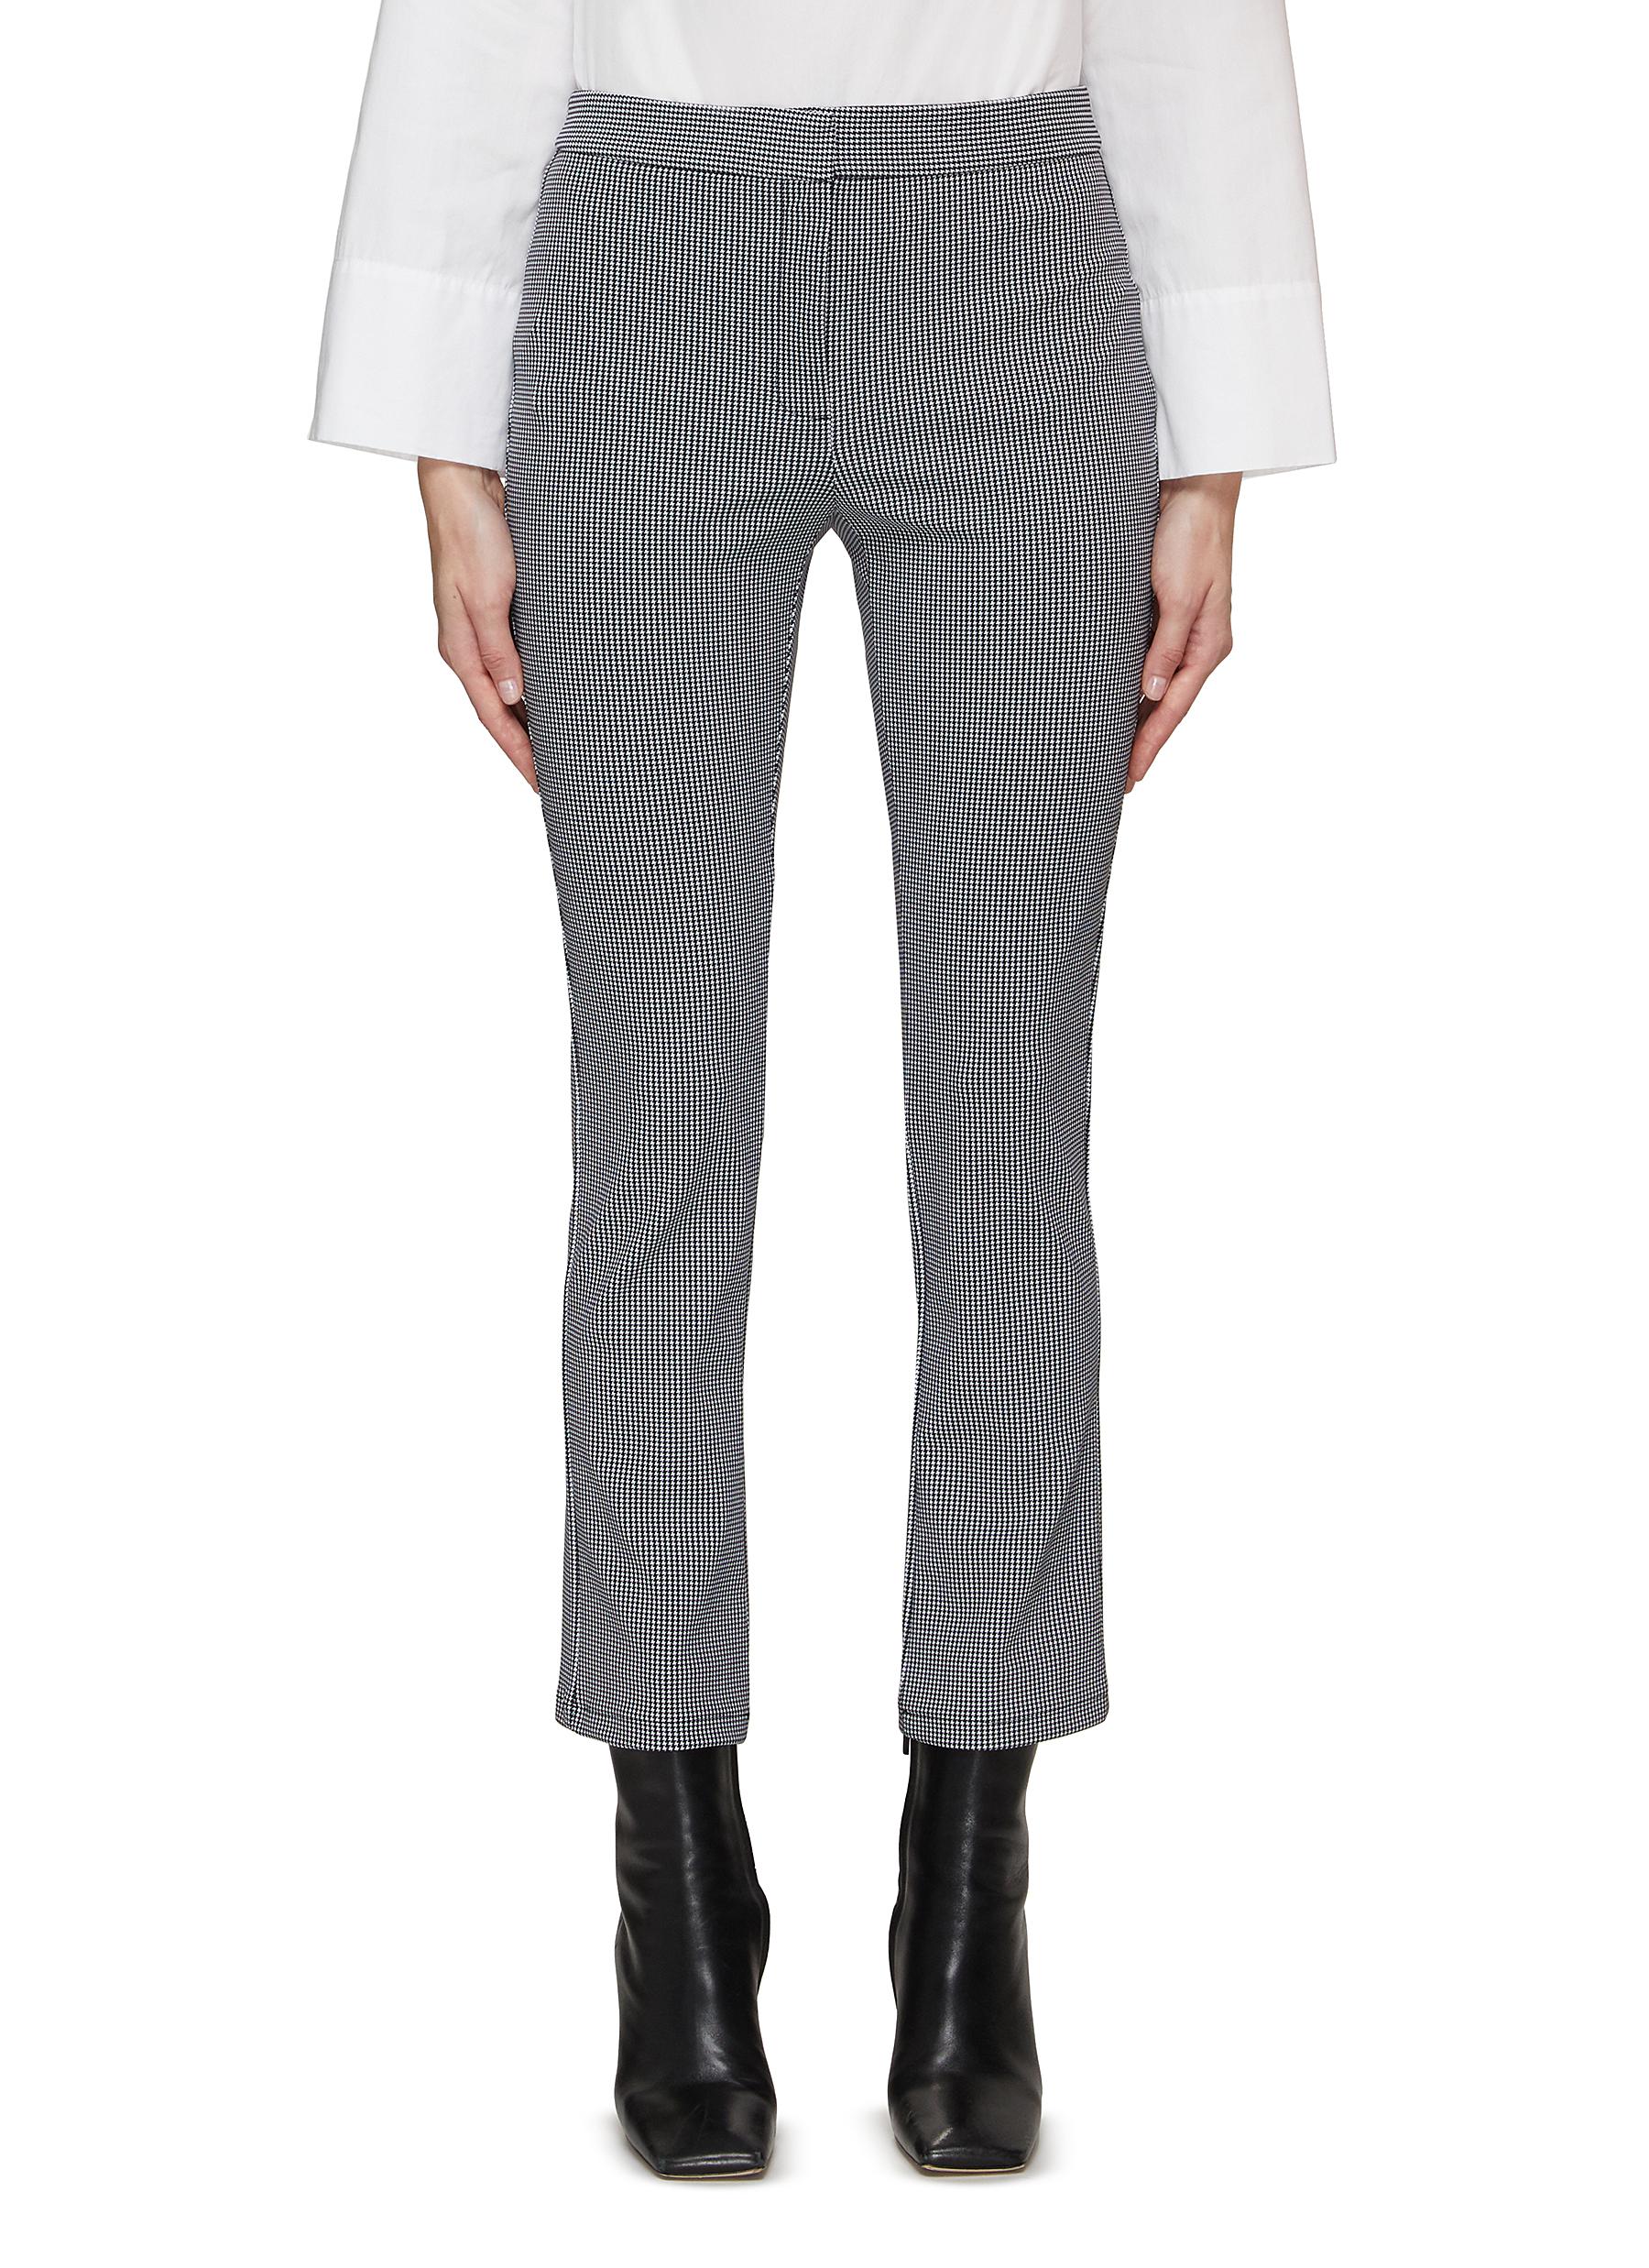 THEORY Houndstooth Slim Cropped Pants